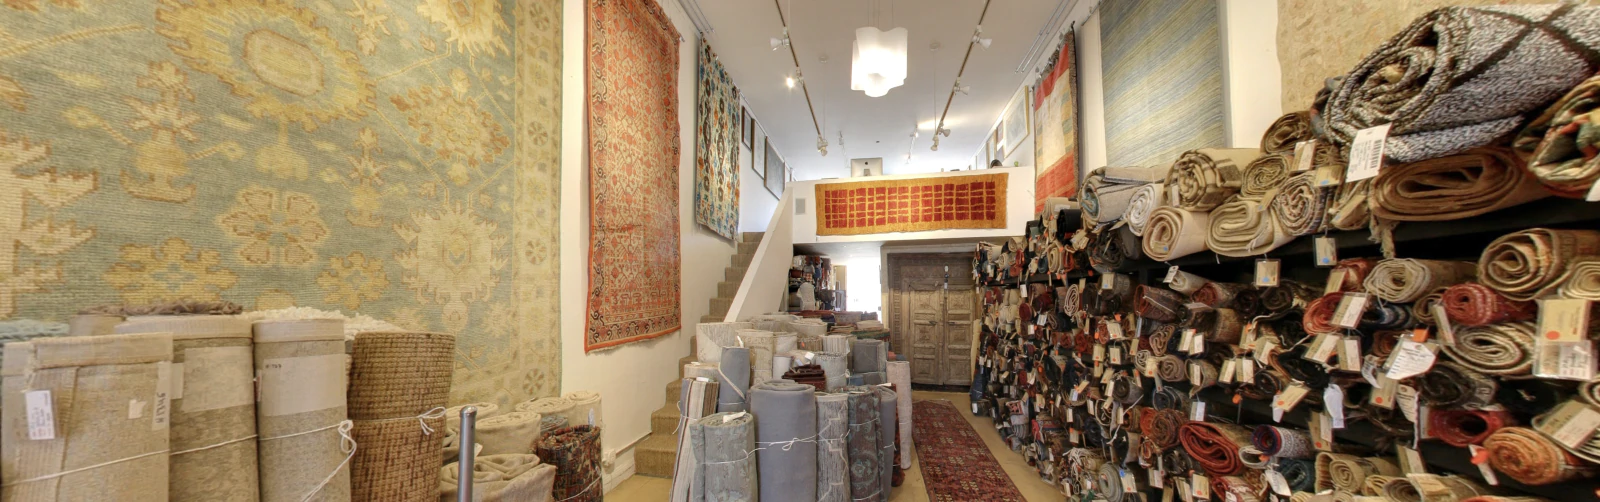 Woven Passion Rugs